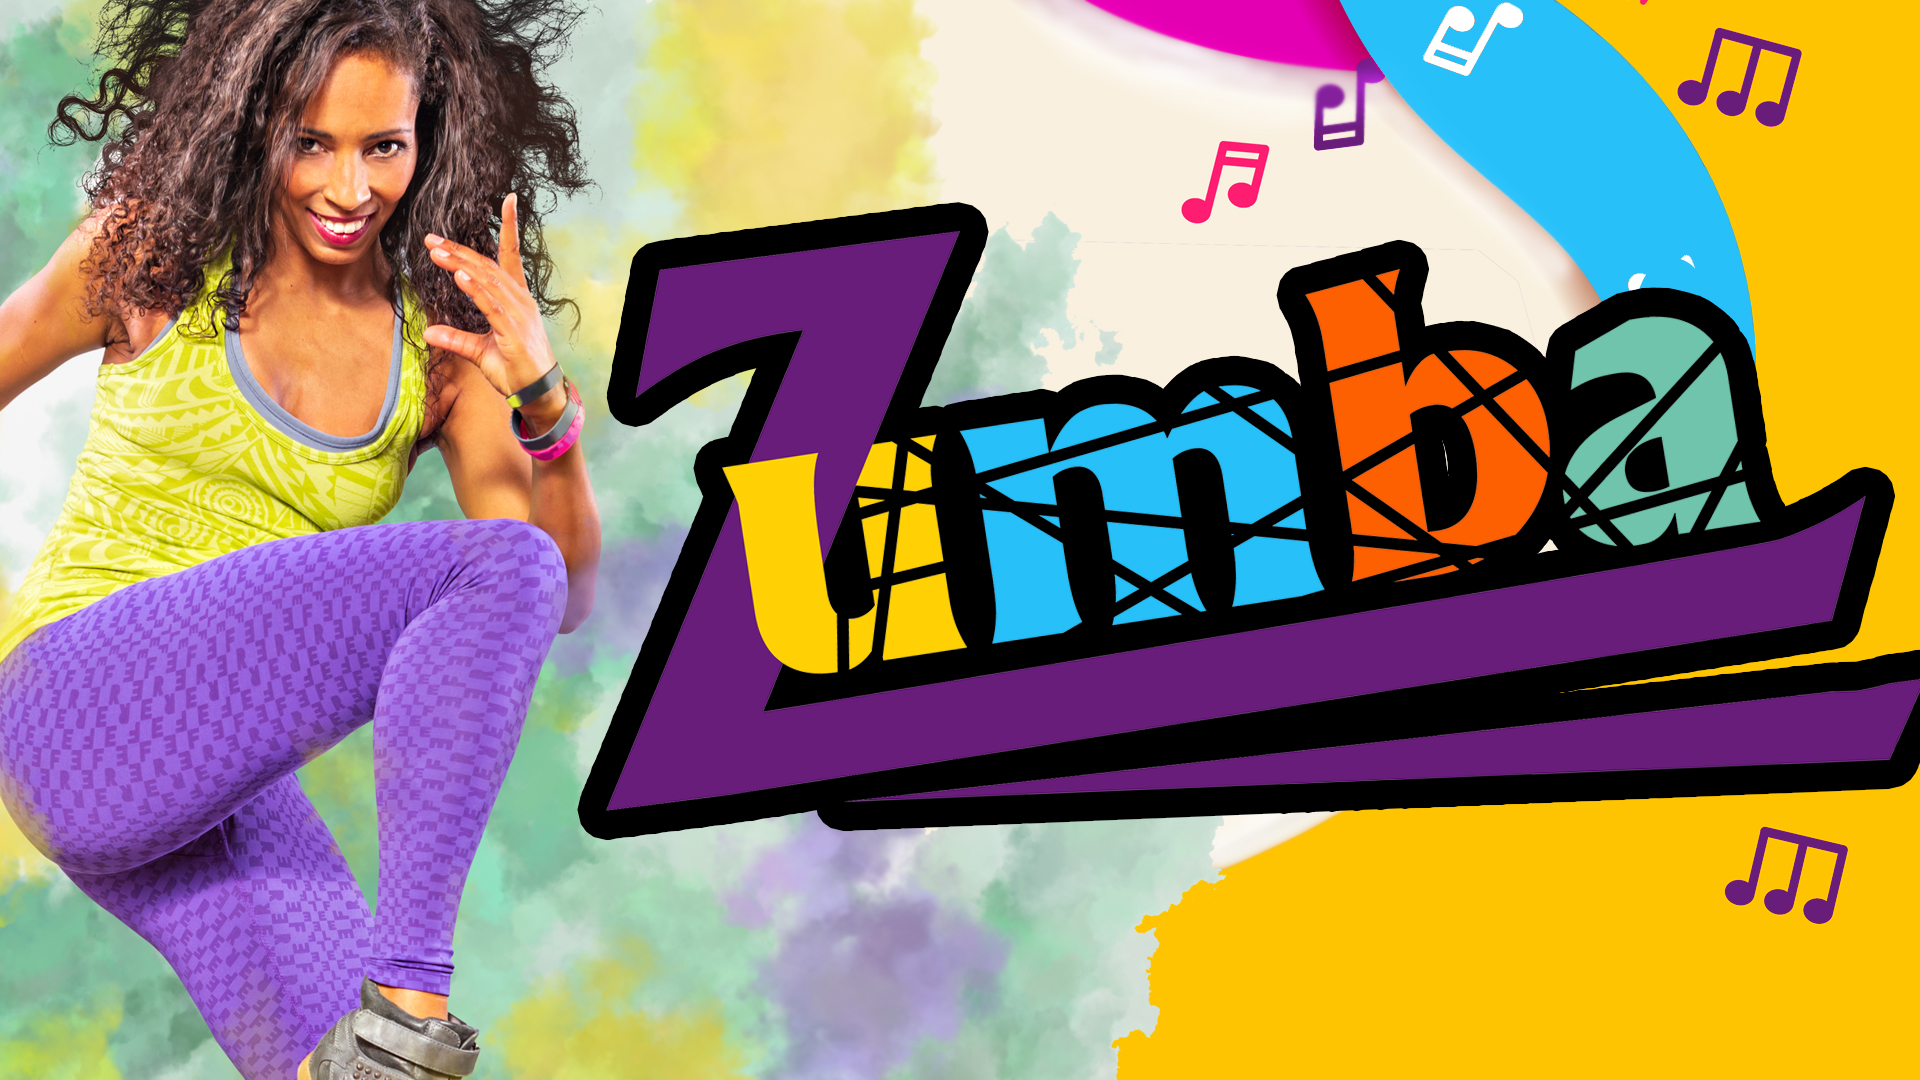 Image reads "Zumba" against a colorful background and a woman dancing is to the left of the title.